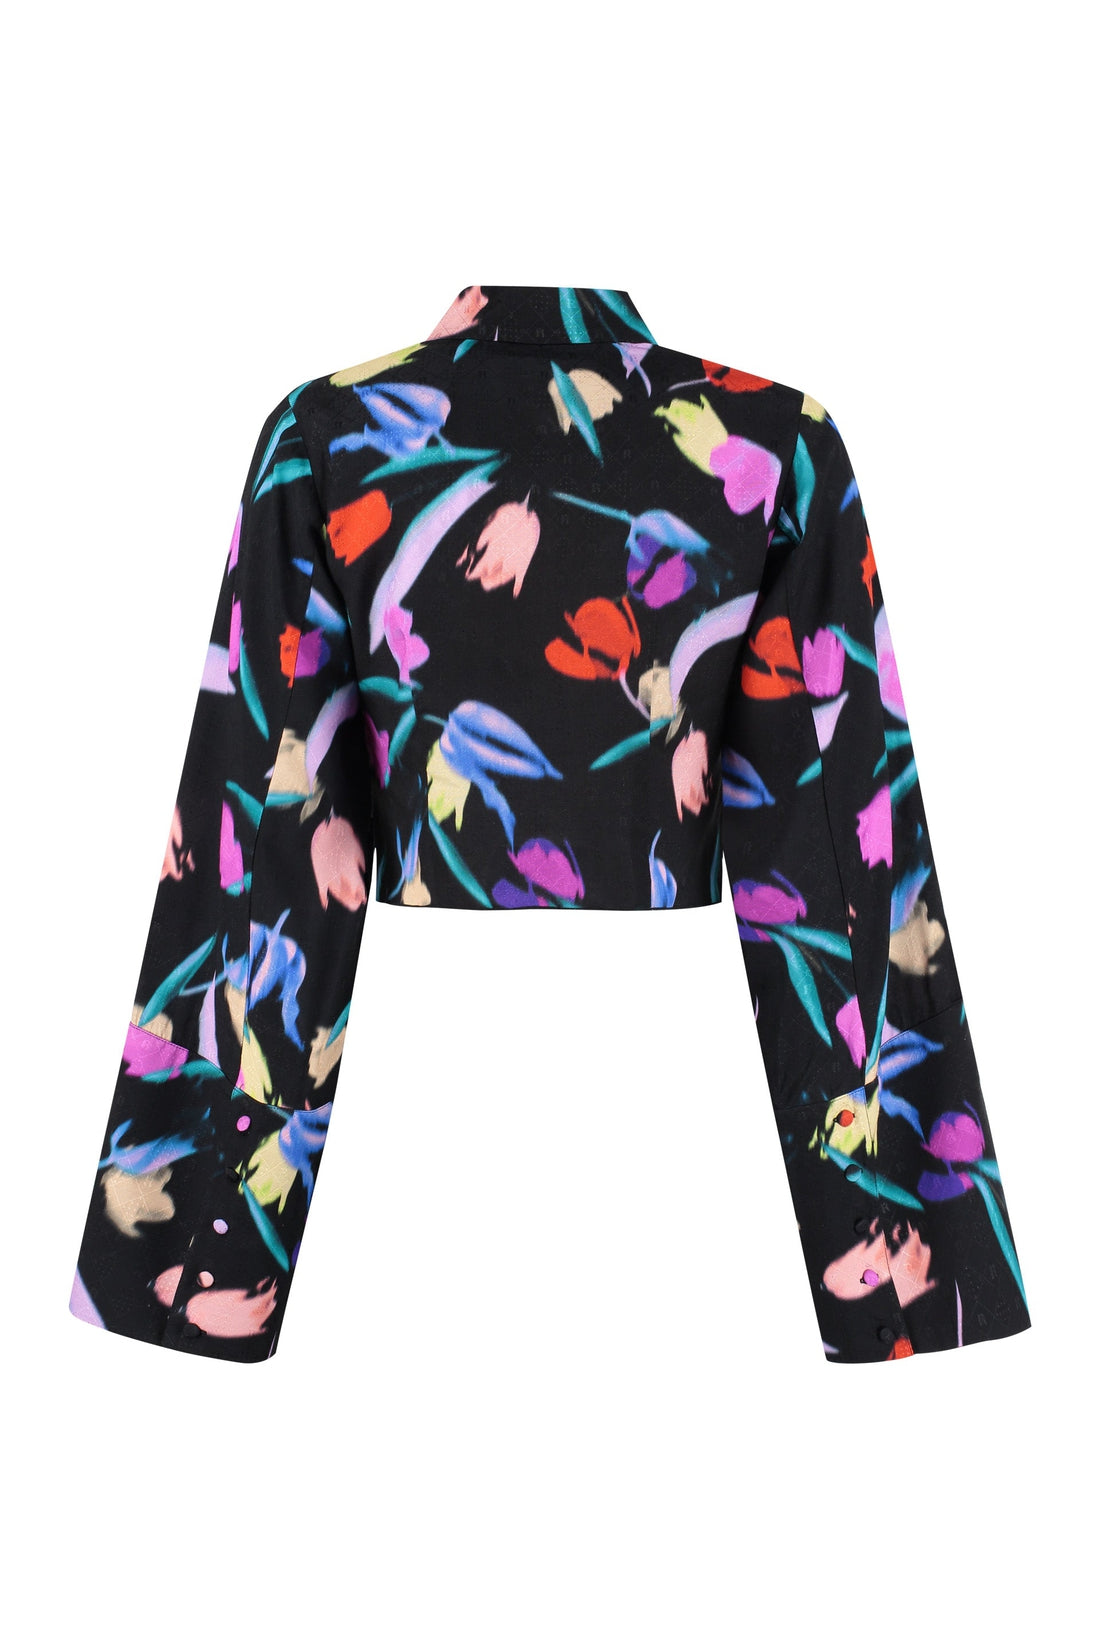 Piralo-OUTLET-SALE-Agatha printed long-sleeve top-ARCHIVIST